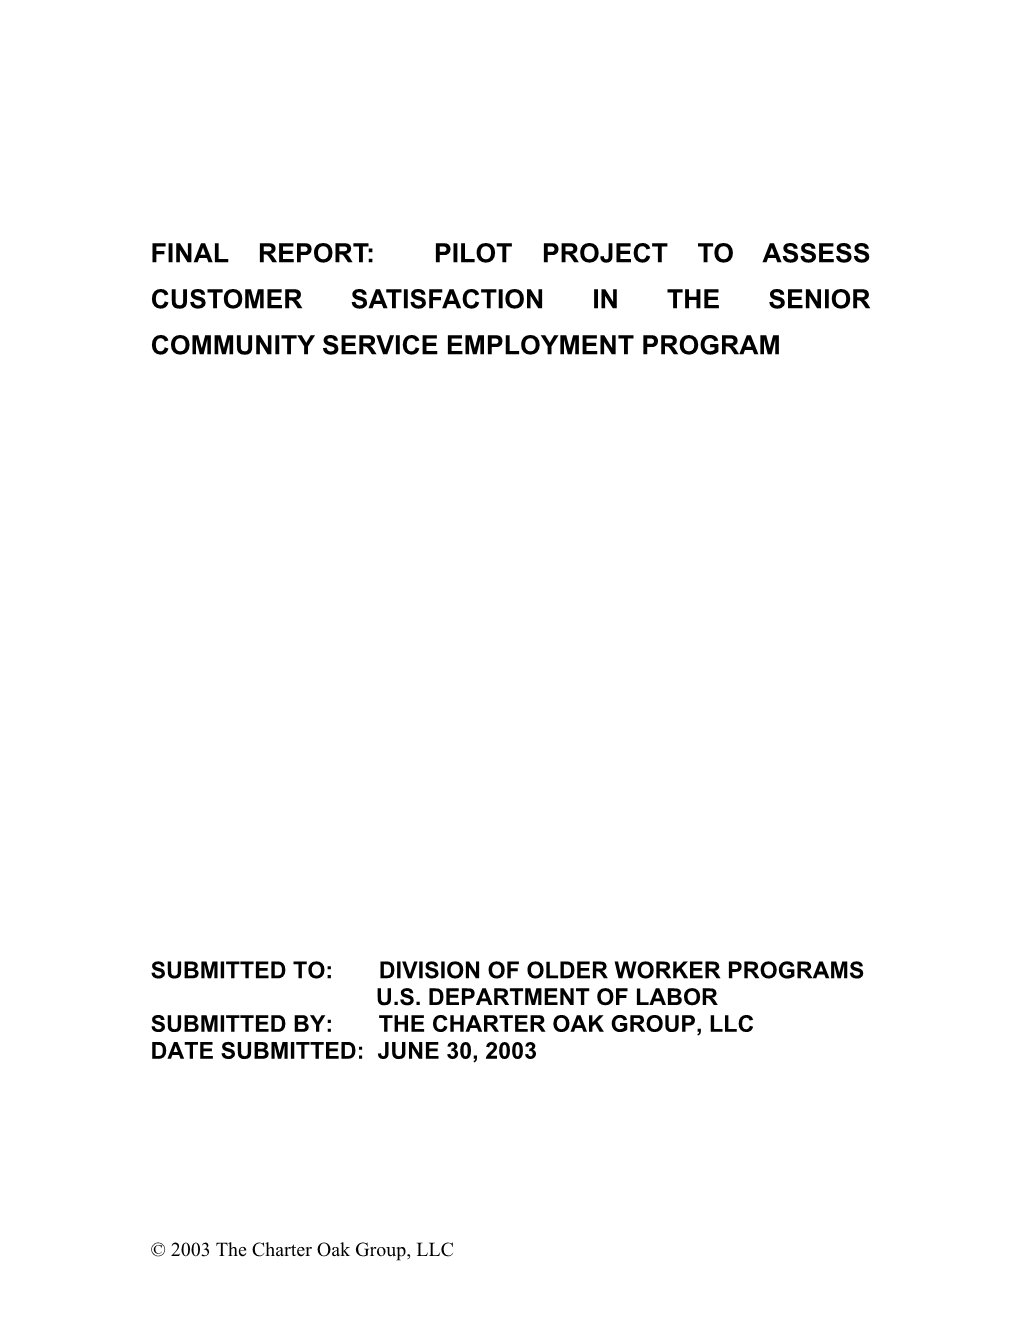 Pilot Project to Assess Customer Satisfaction in the Senior Community Service Employment Program